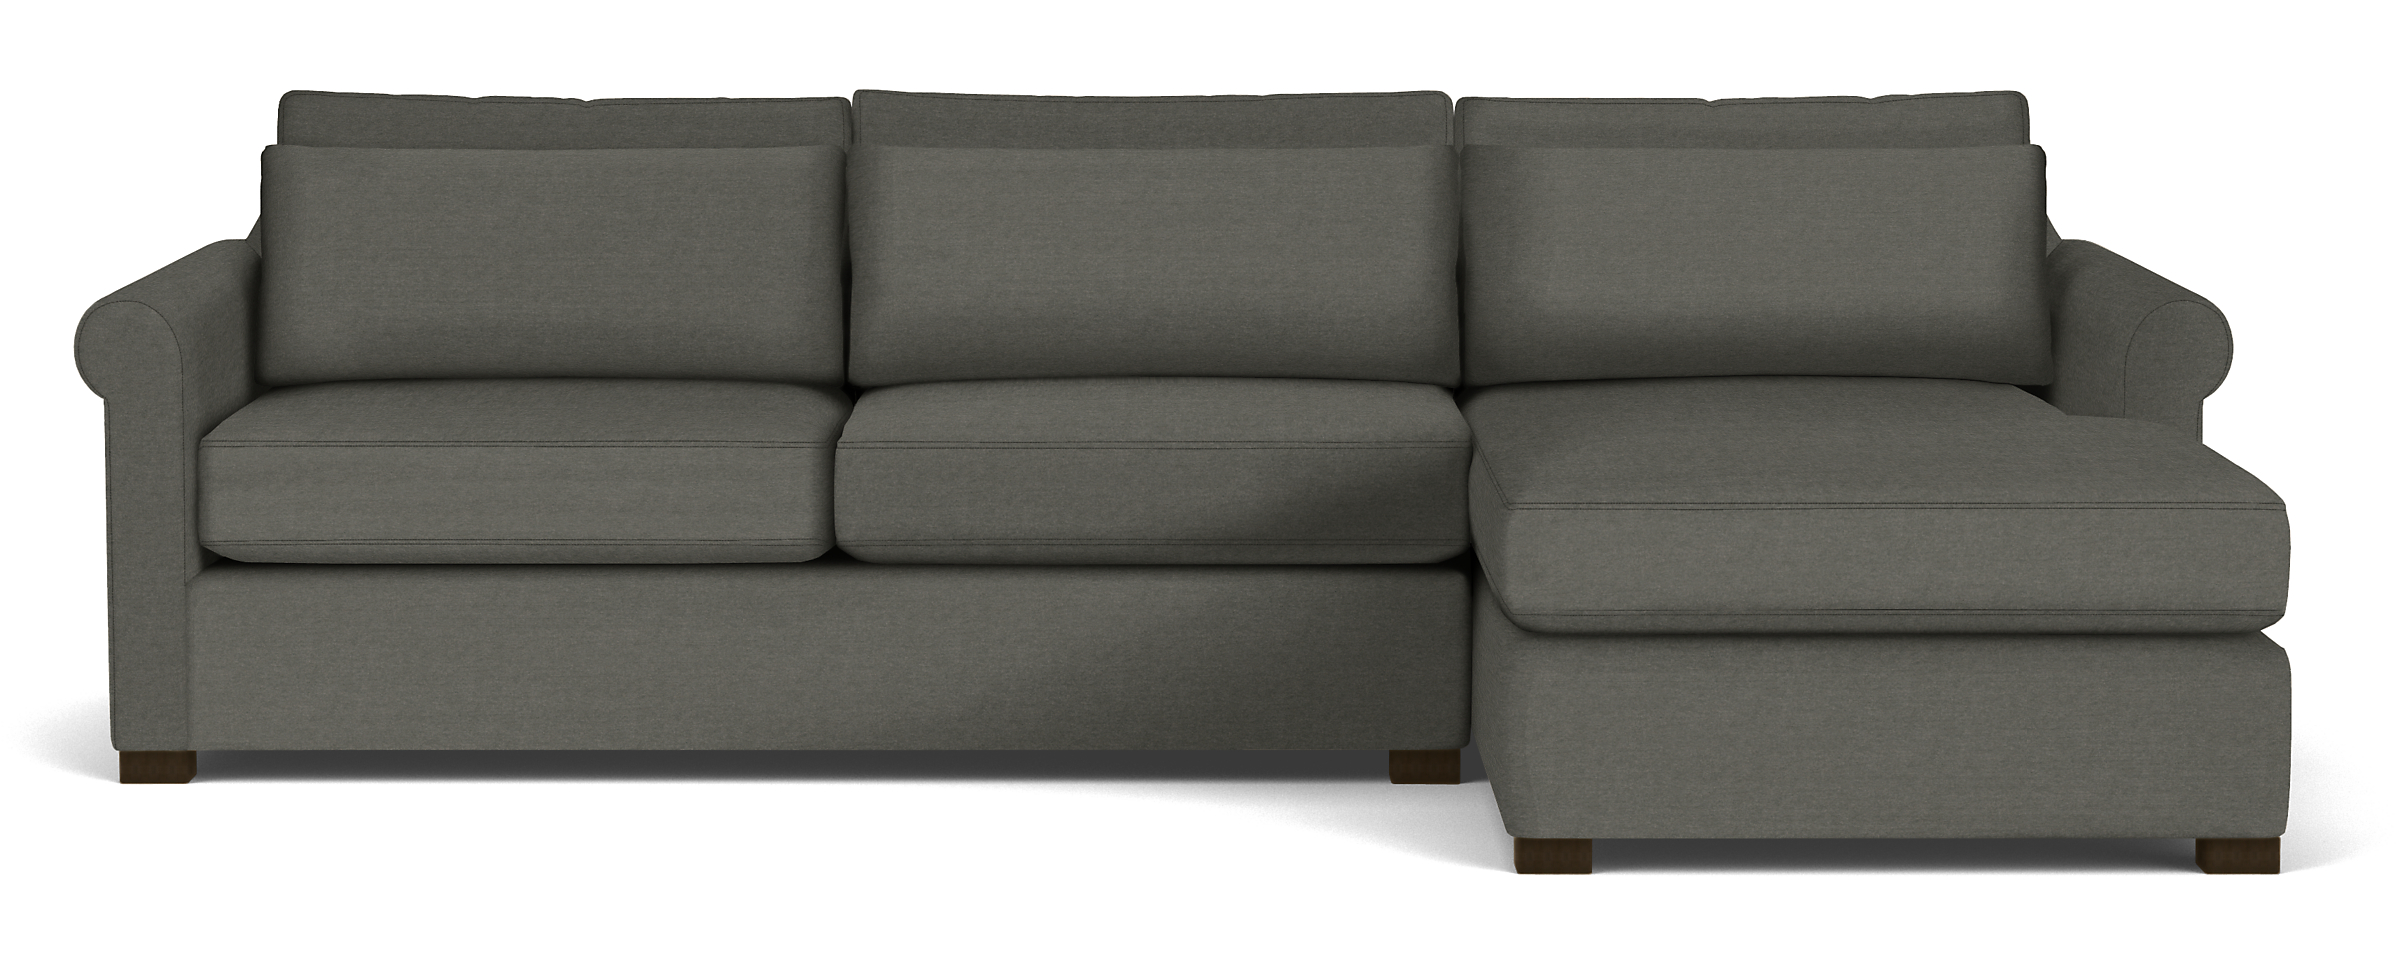 Tegan 110" Sofa with Right-Arm Chaise